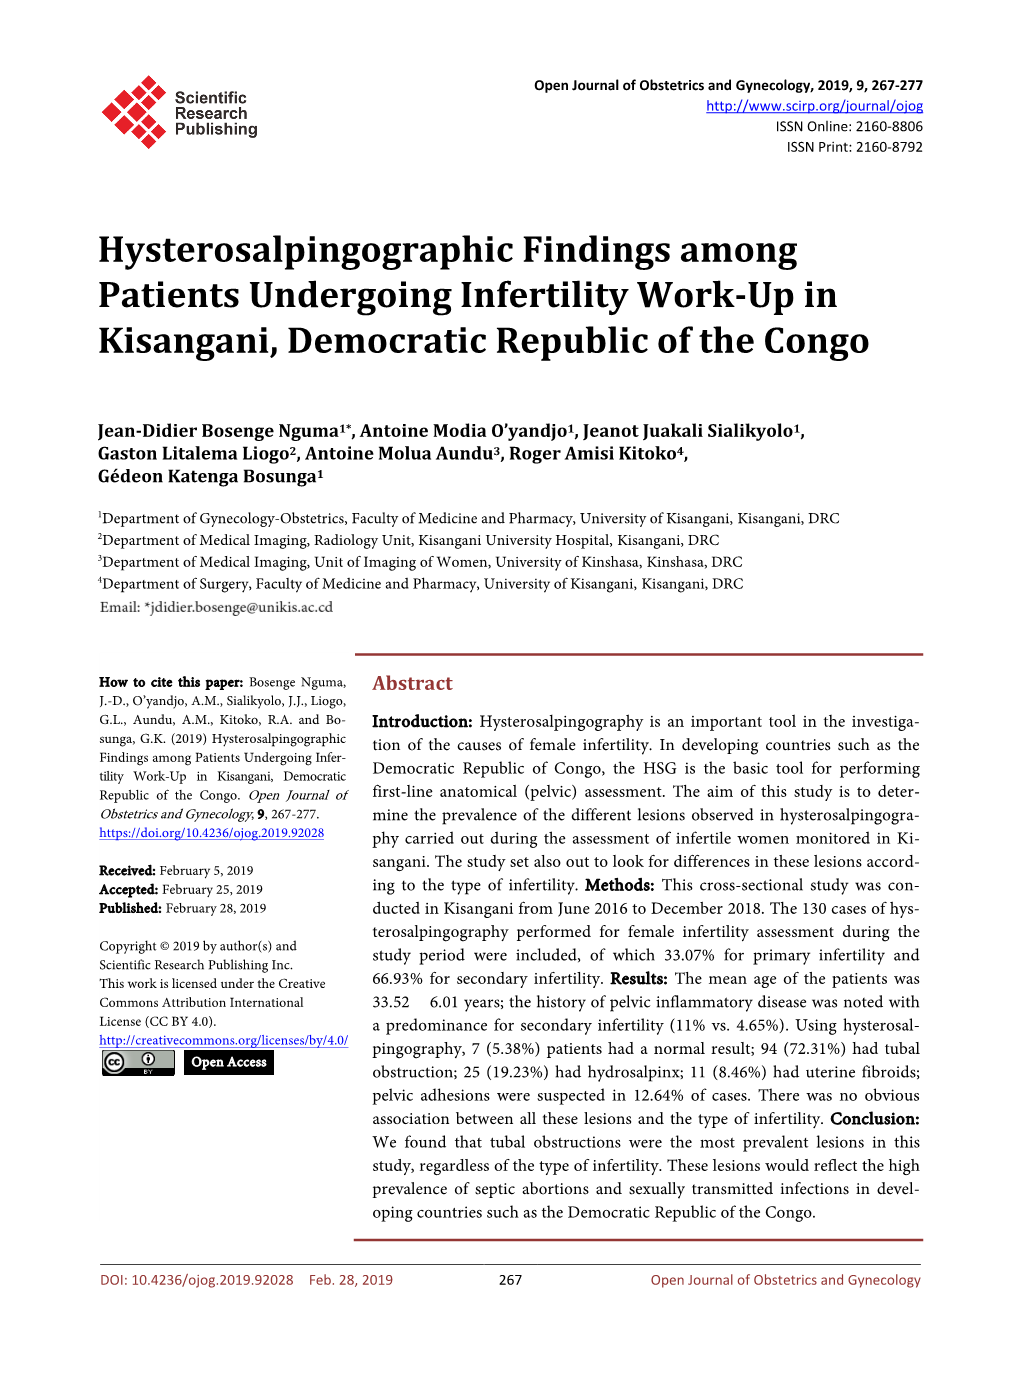 Hysterosalpingographic Findings Among Patients Undergoing Infertility Work-Up in Kisangani, Democratic Republic of the Congo